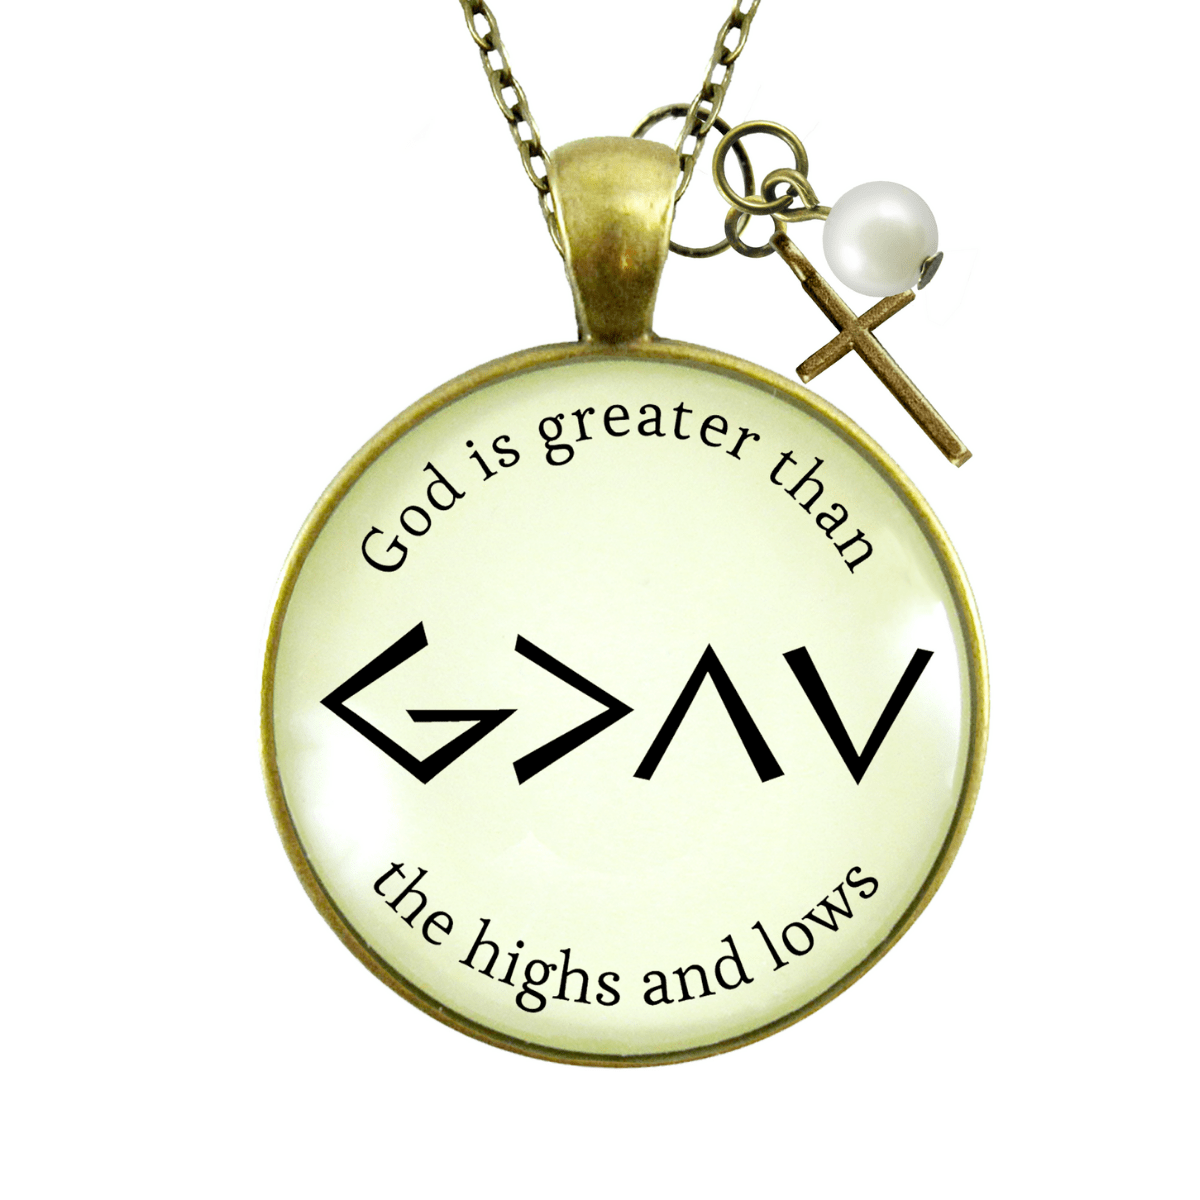 Gutsy Goodness God is Greater Than Highs Lows Christian Necklace Jewelry Cross Charm - Gutsy Goodness Handmade Jewelry;God Is Greater Than Highs Lows Christian Necklace Jewelry Cross Charm - Gutsy Goodness Handmade Jewelry Gifts